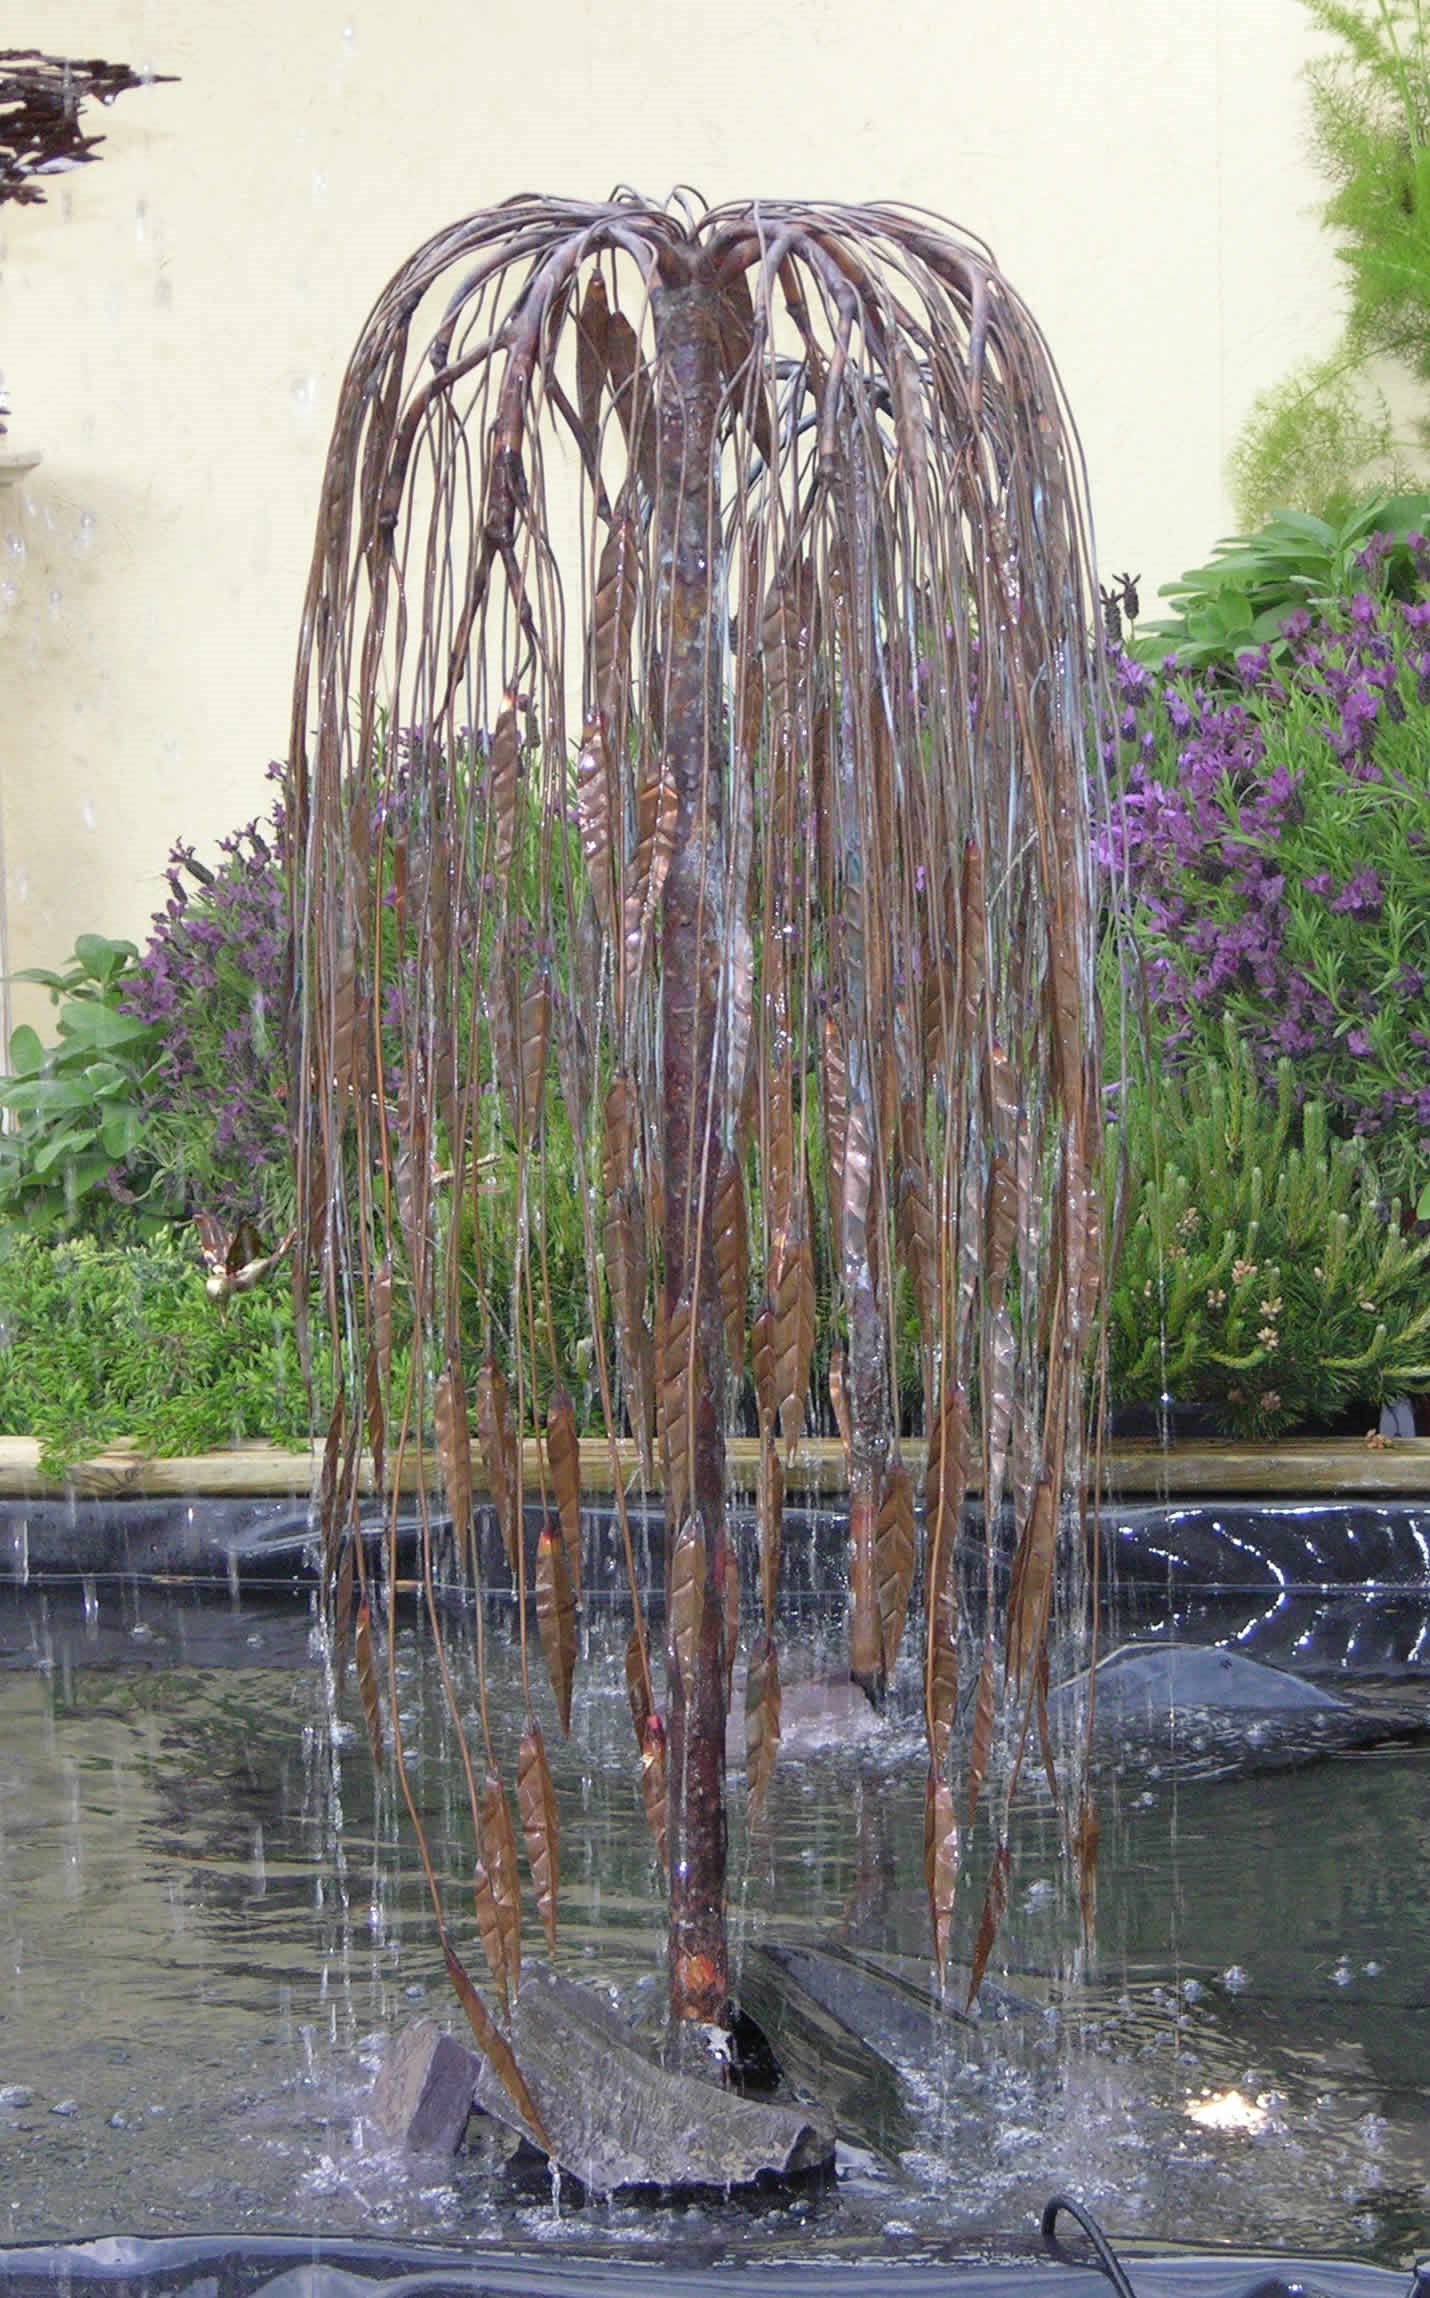 Weeping Willow Copper Tree Water Feature - Large - With Plastic Reservoir